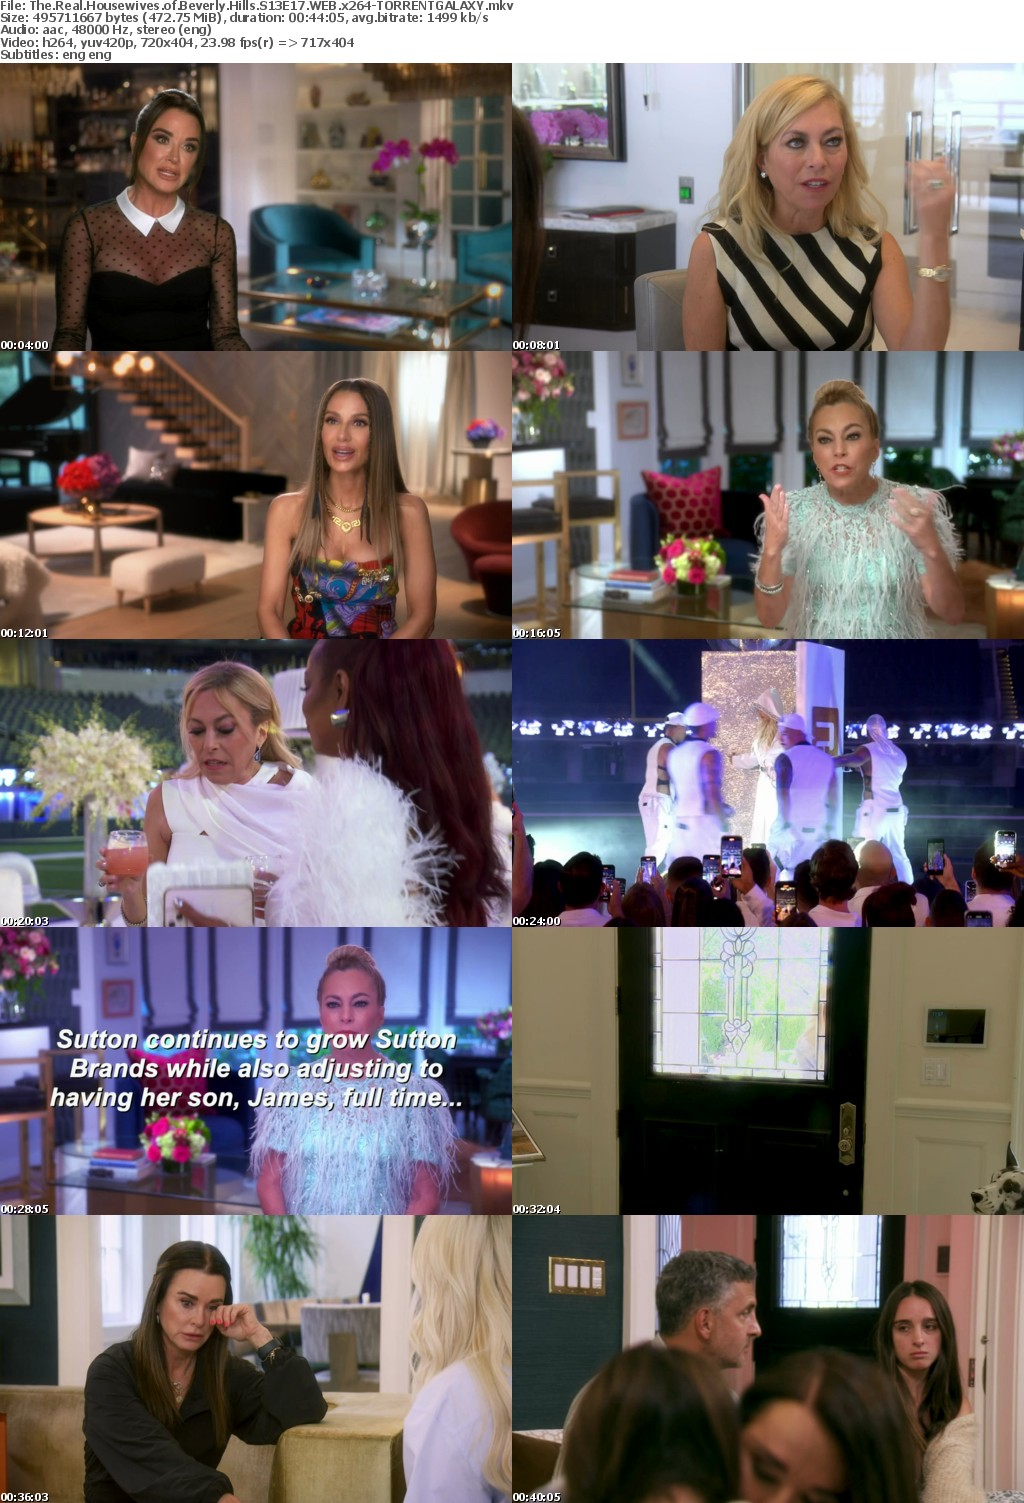 The Real Housewives of Beverly Hills S13E17 WEB x264-GALAXY